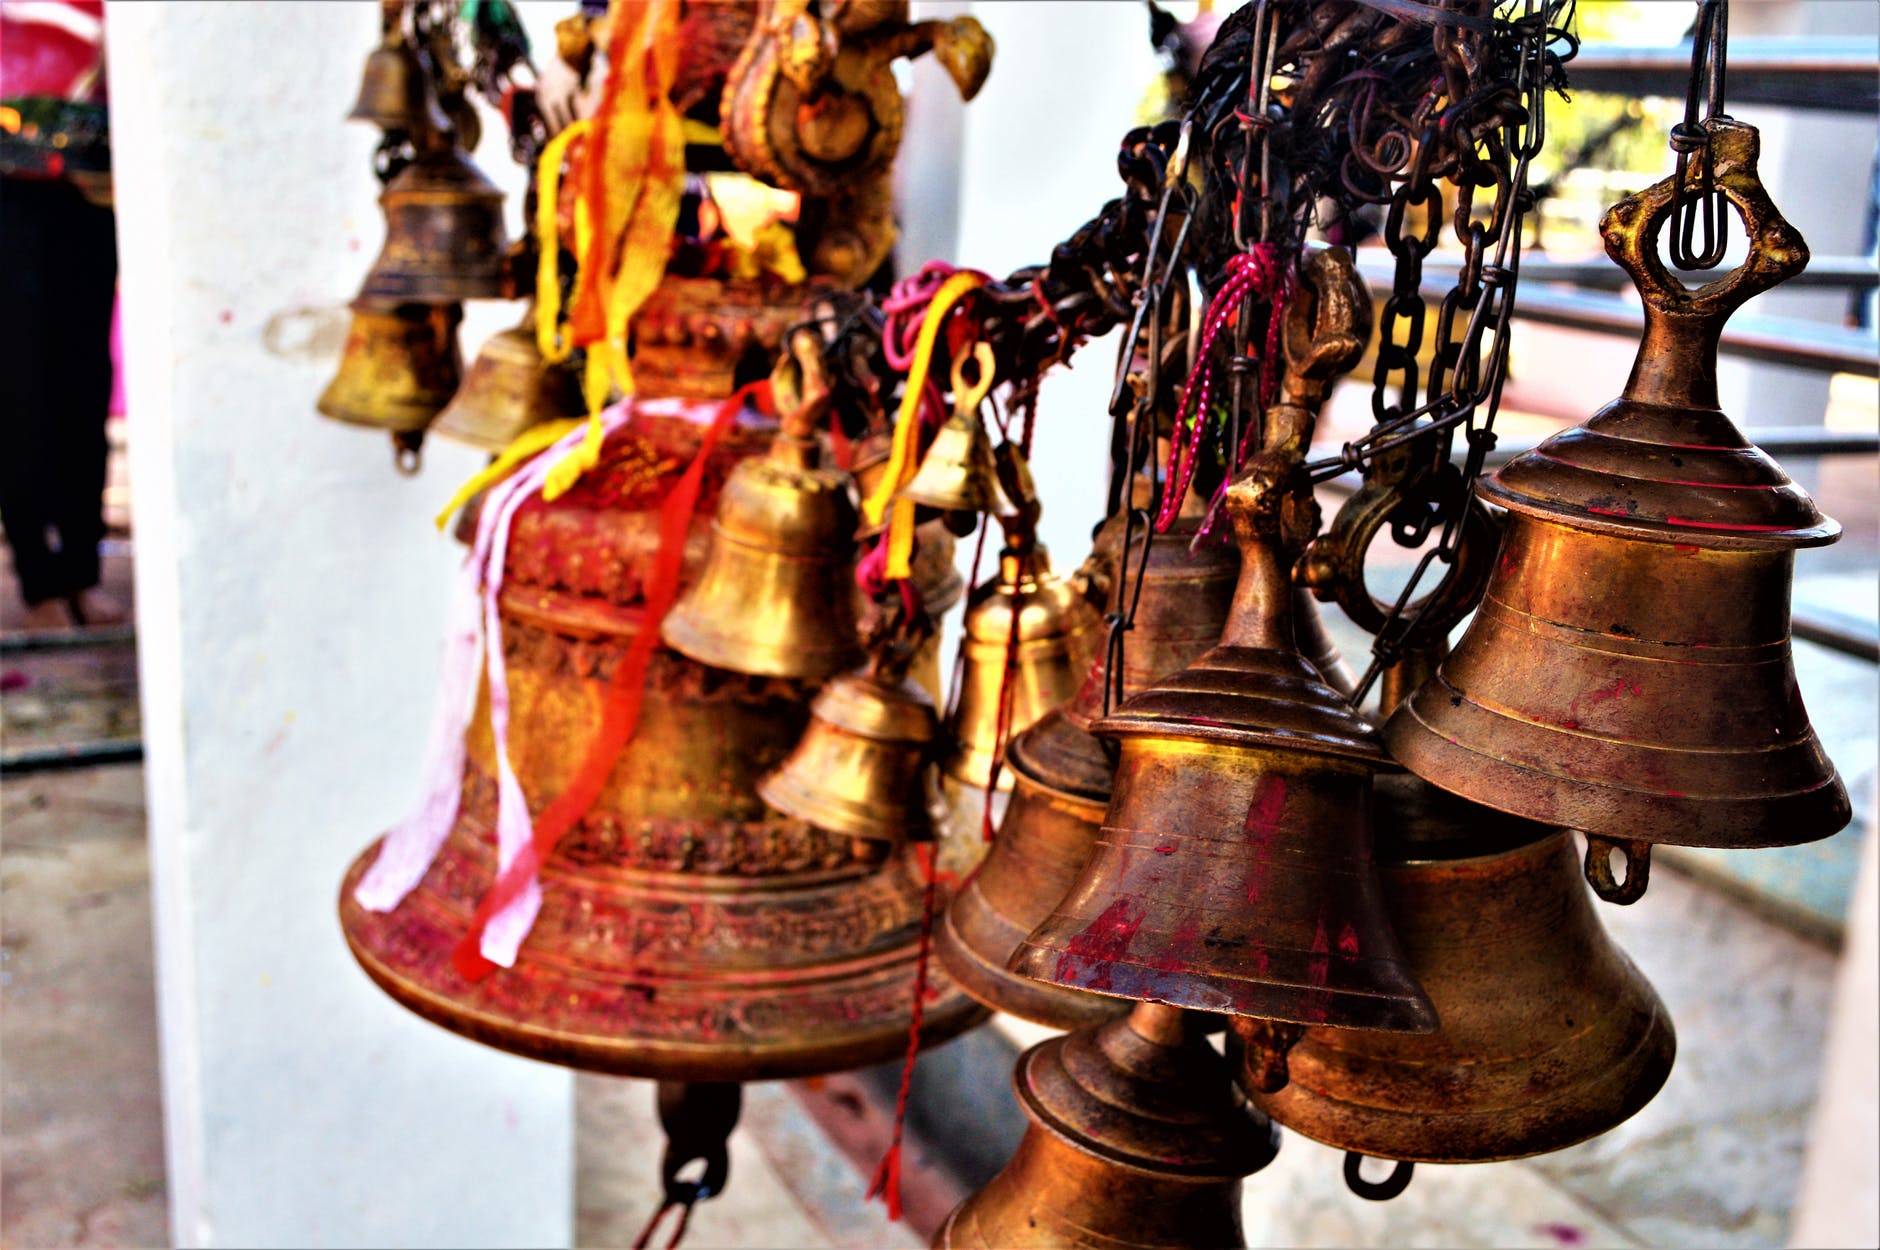 The temple is filled with Bells. 